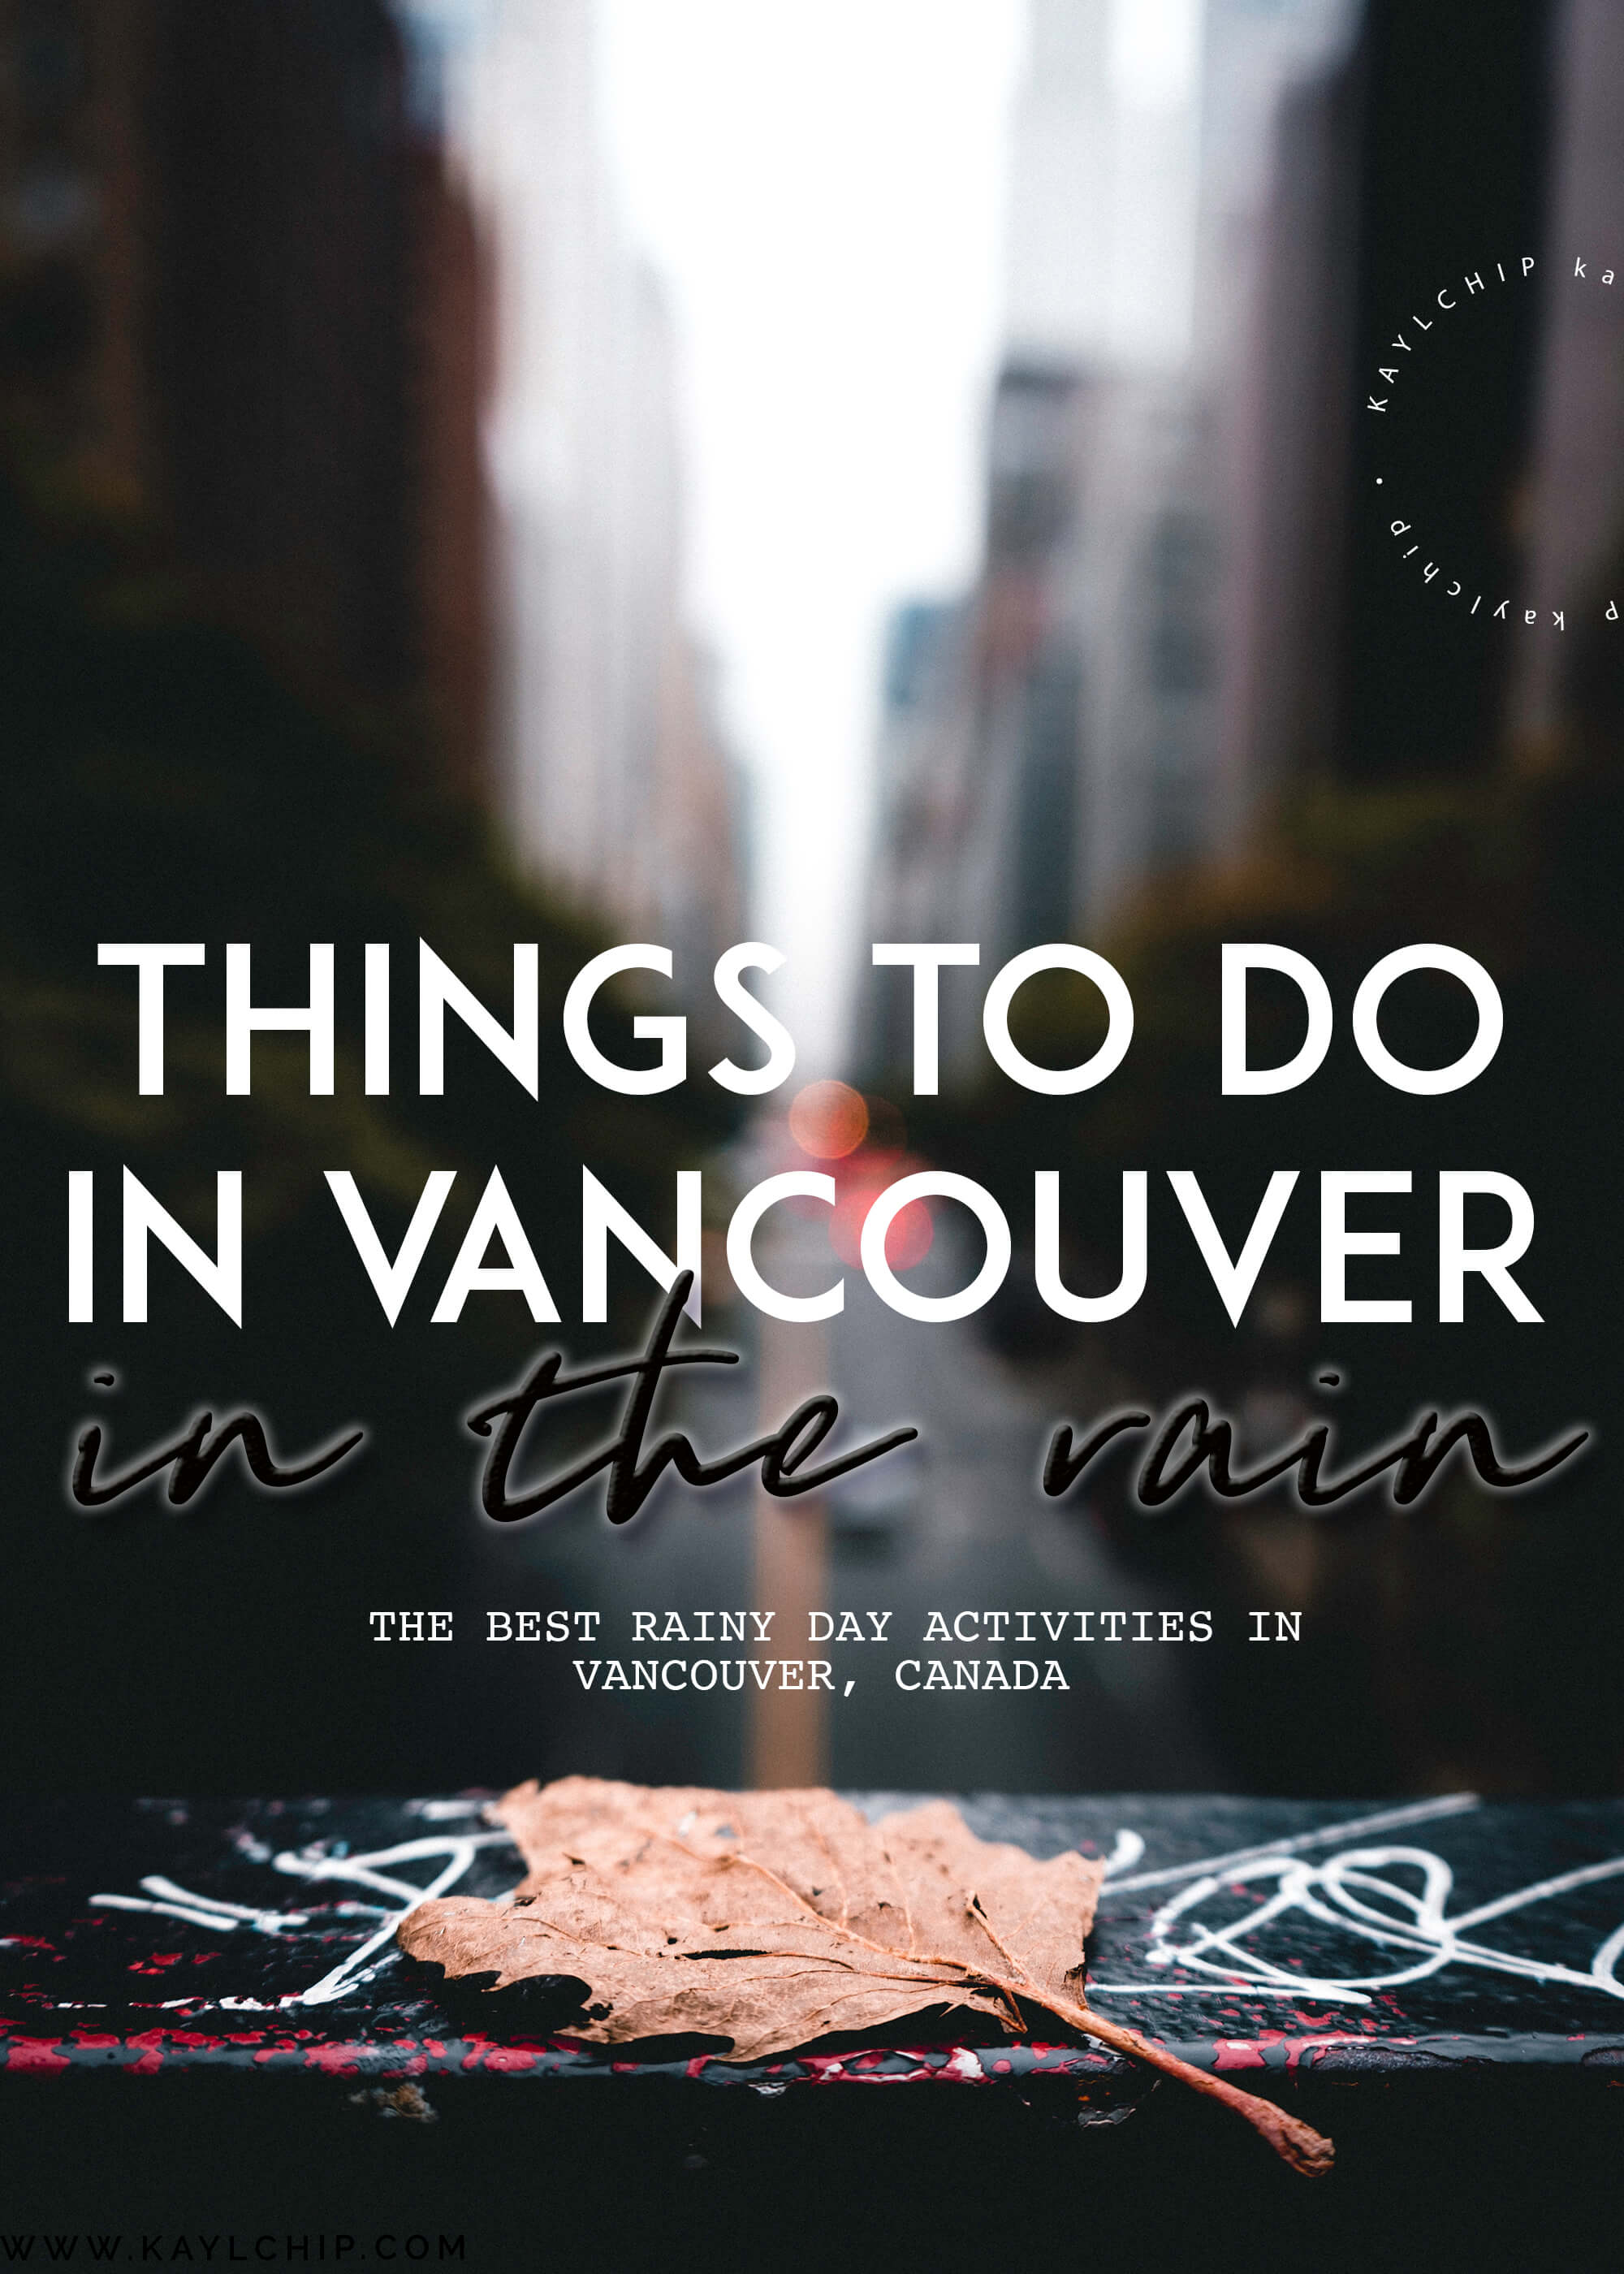 Things to Do in Vancouver Canada in the Rain